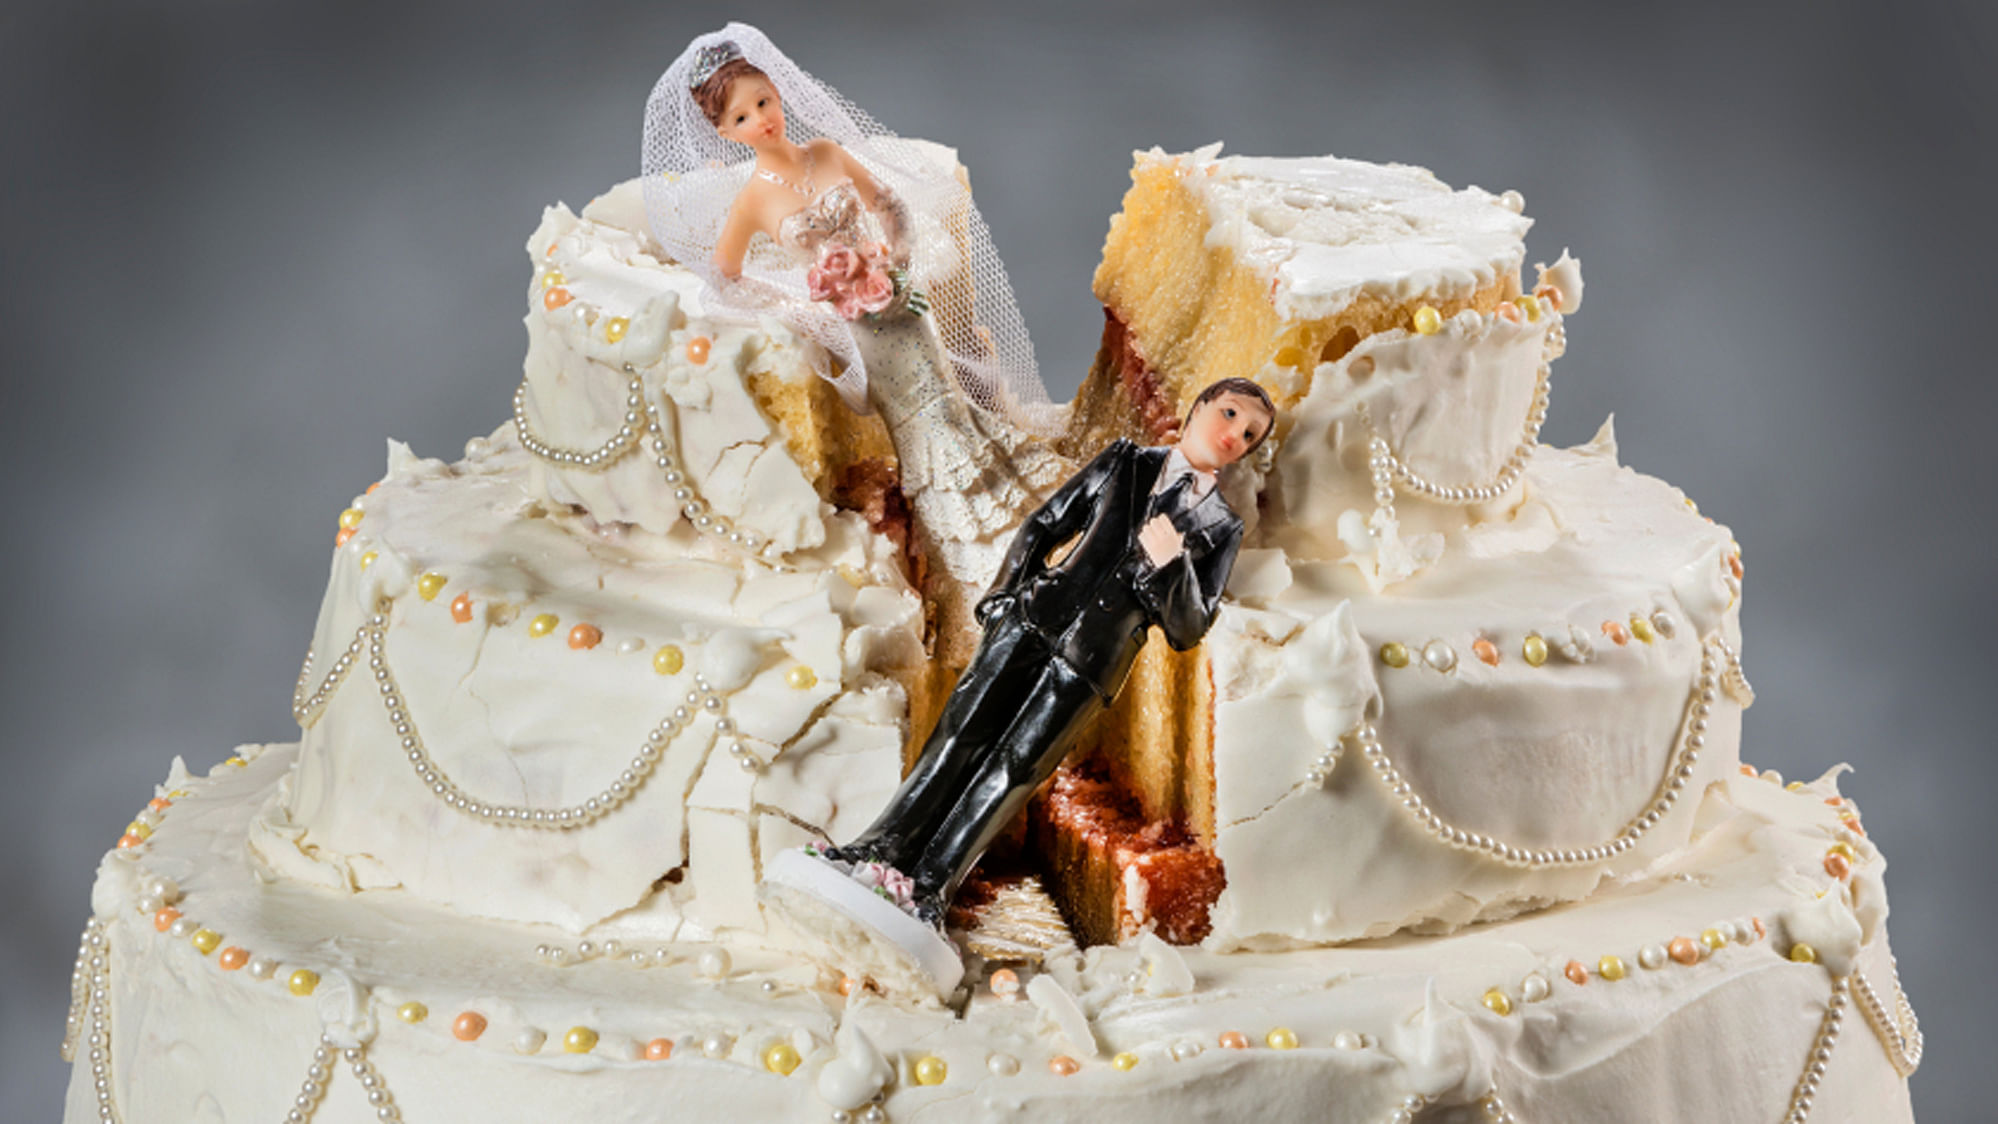 Don’t let divorce pull you down, advises a lawyer who’s been there herself. (Photo: iStock)